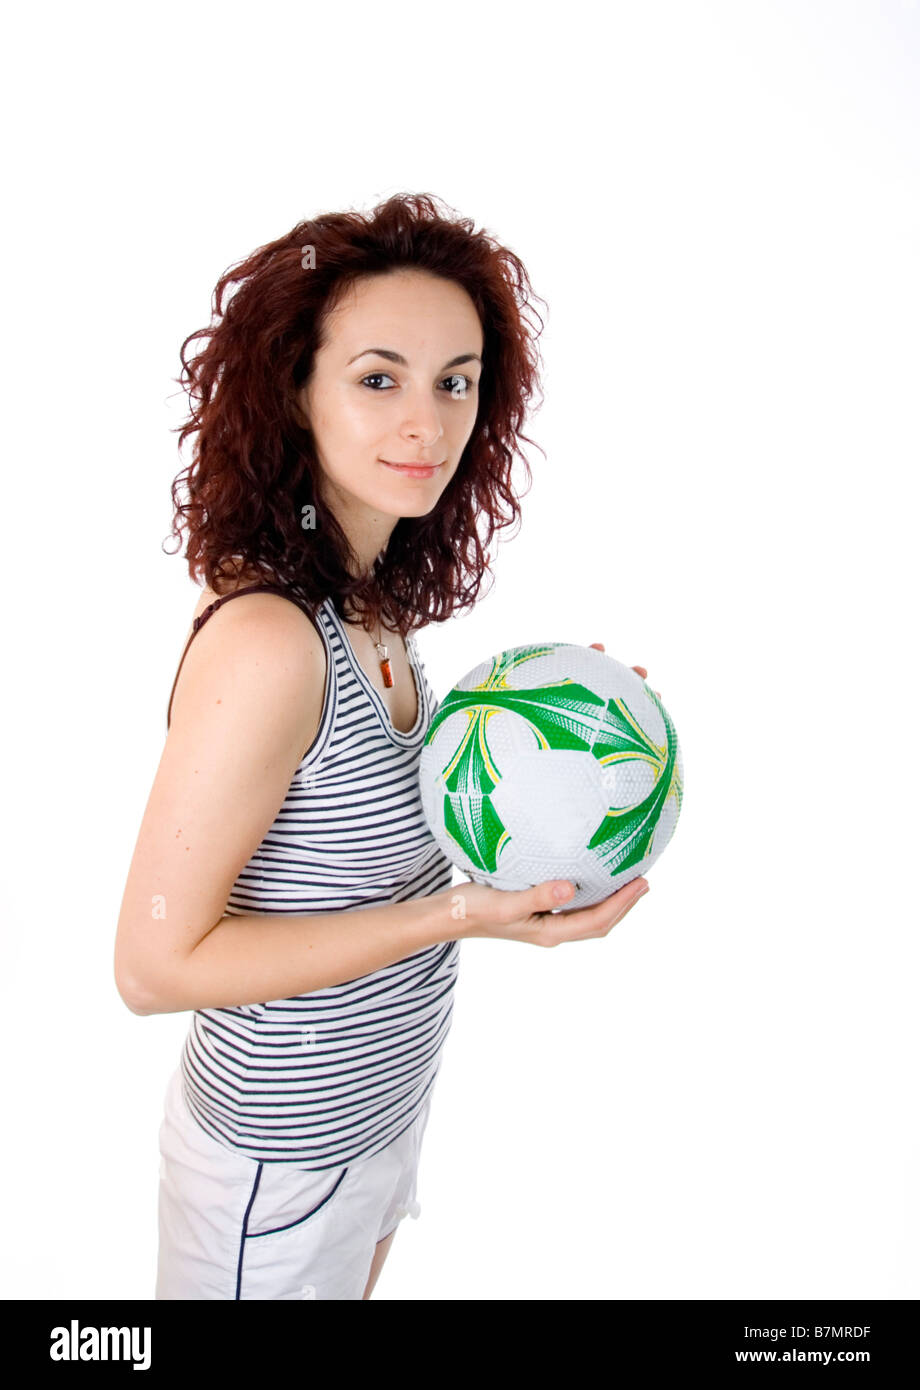 Woman with a football ball Stock Photo